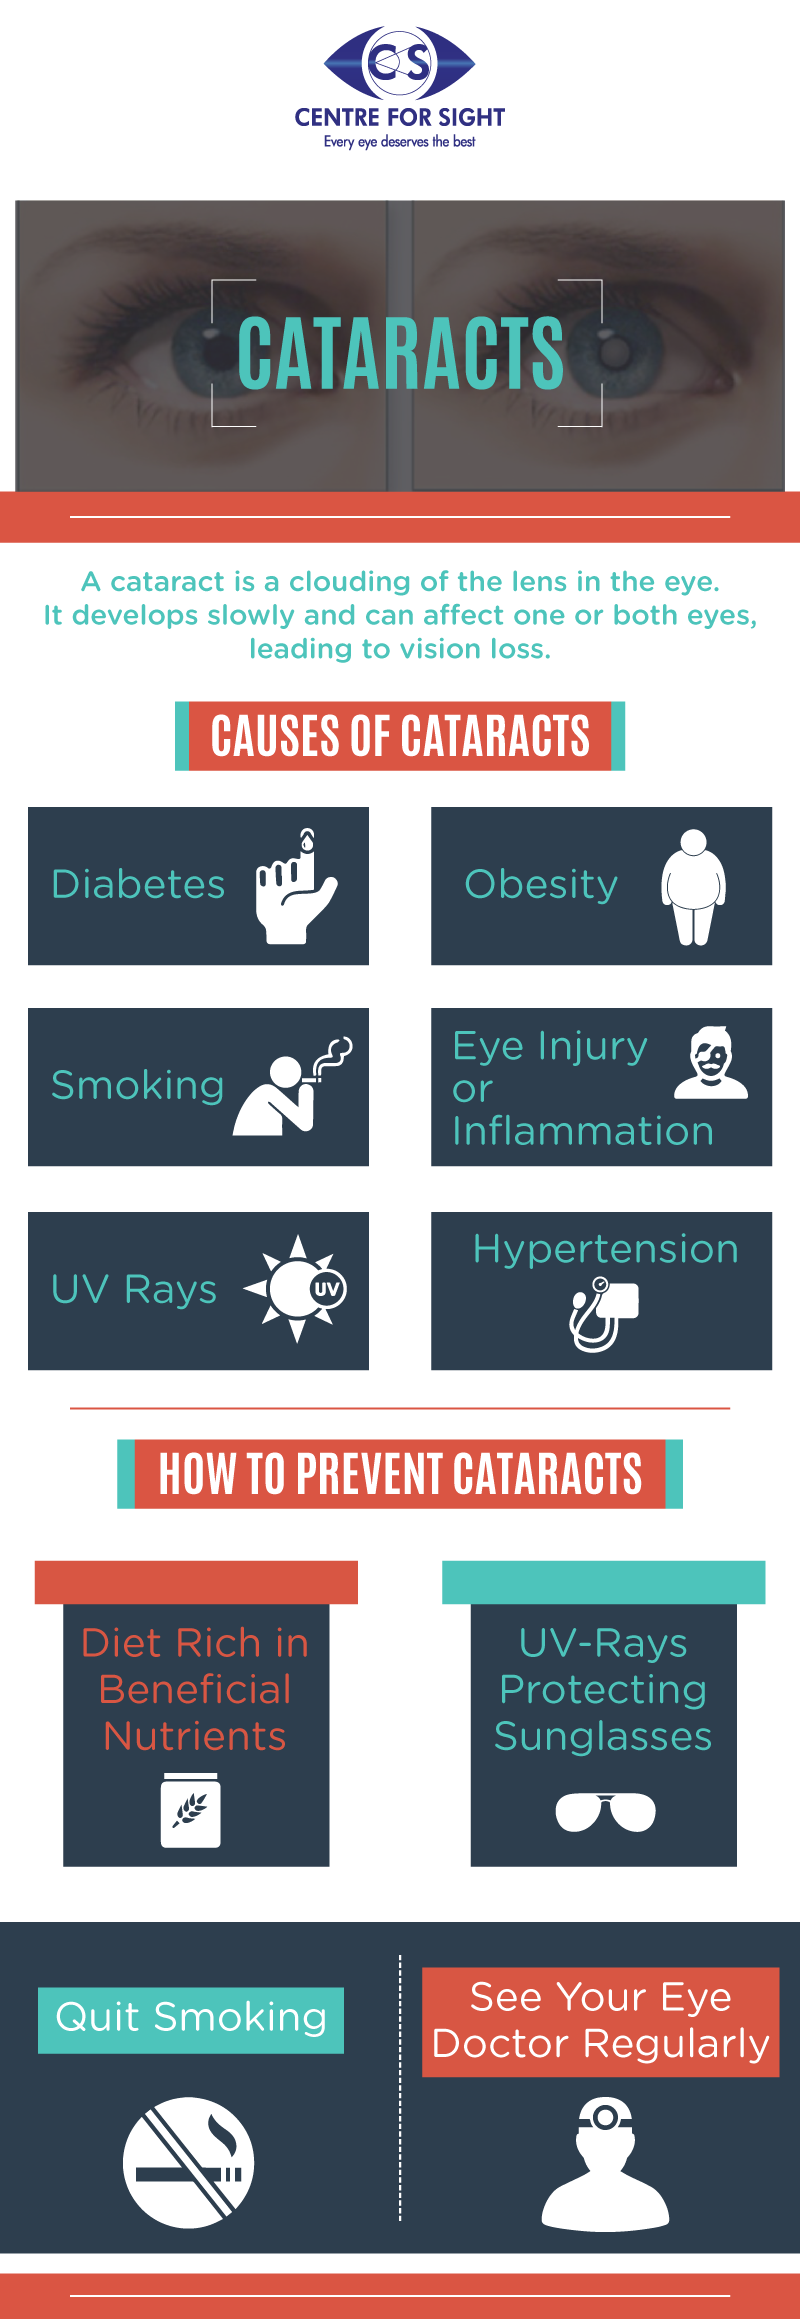 Cataracts A cataract is clouding of the lens in the eye. It develops slowly and can affect one or both eyes, leading to vision loss.

http://www.centreforsight.net/ by centreforsight